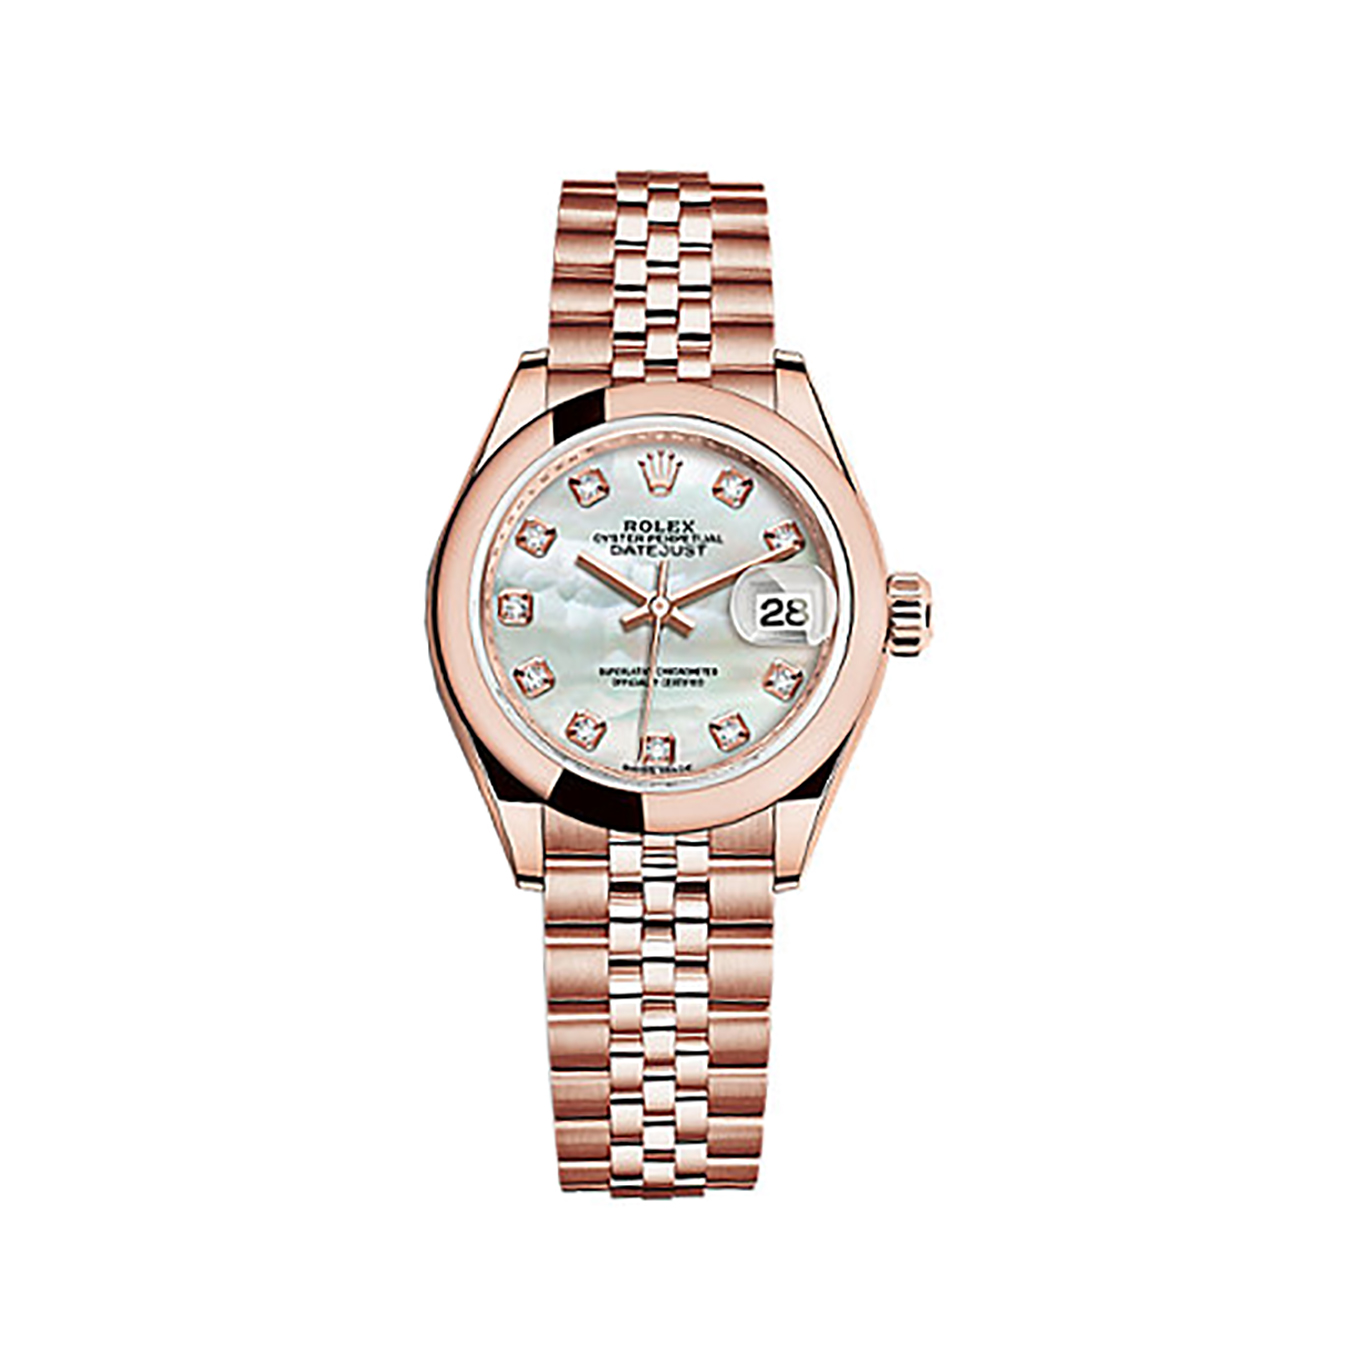 Lady-Datejust 28 279165 Rose Gold Watch (White Mother-of-pearl Set with Diamonds)